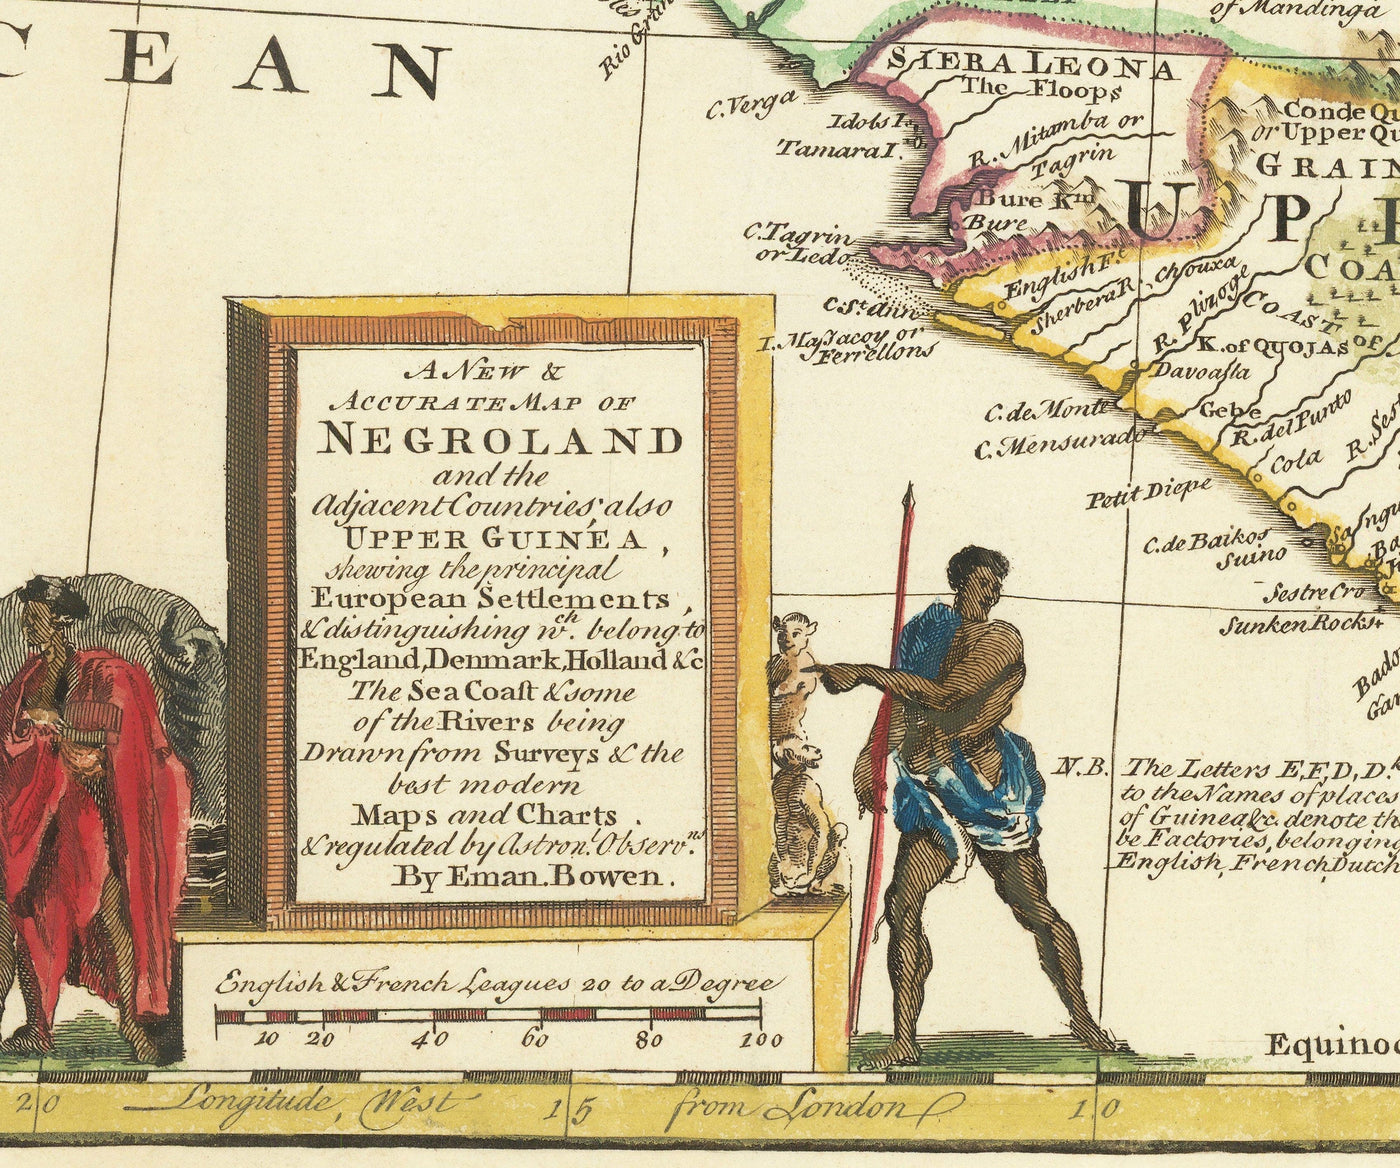 Old Map of Negroland, 1747 by Bowen - Handcoloured Pre-Colonial West Africa - Slave Trade, Ivory Coast, Gold Coast